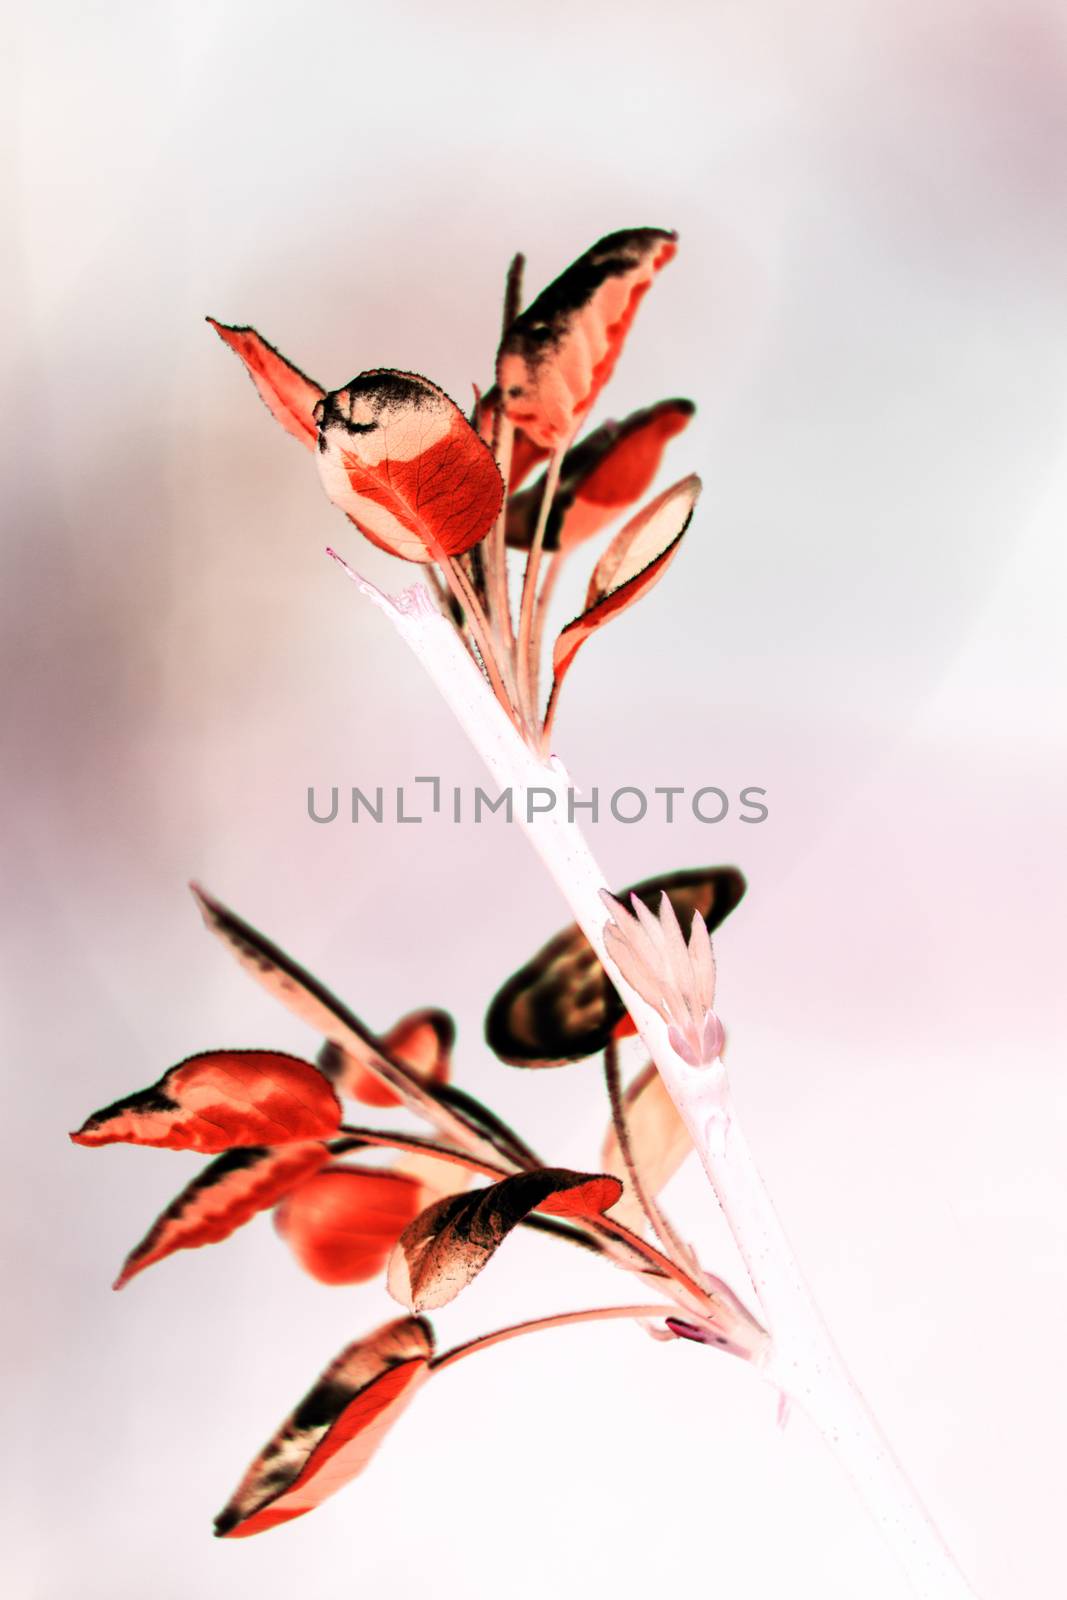 Artistic colored photo creation from photo shot of a branch with leaf sprouts in japan style by robbyfontanesi